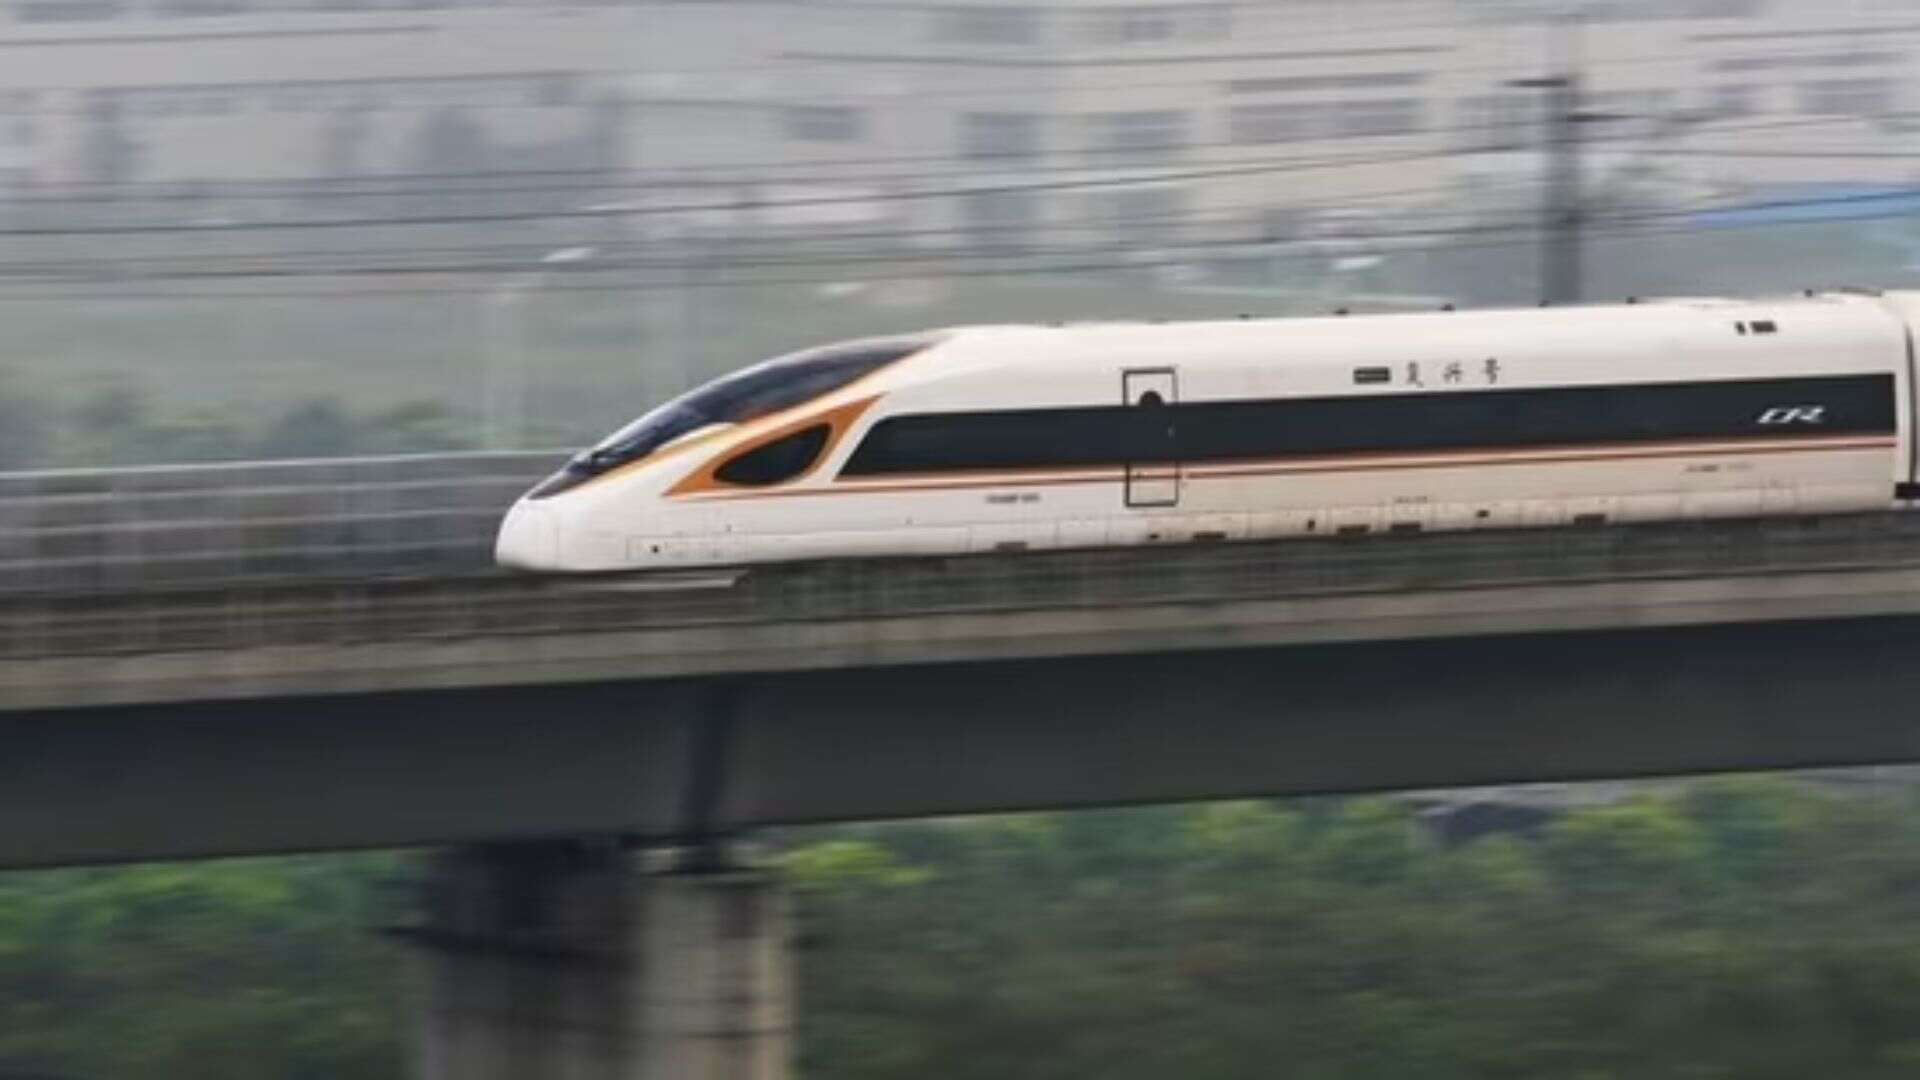 New Speed Sleeper Trains To Be Launched, Cuts Beijing-Hong Kong Travel Time In Half